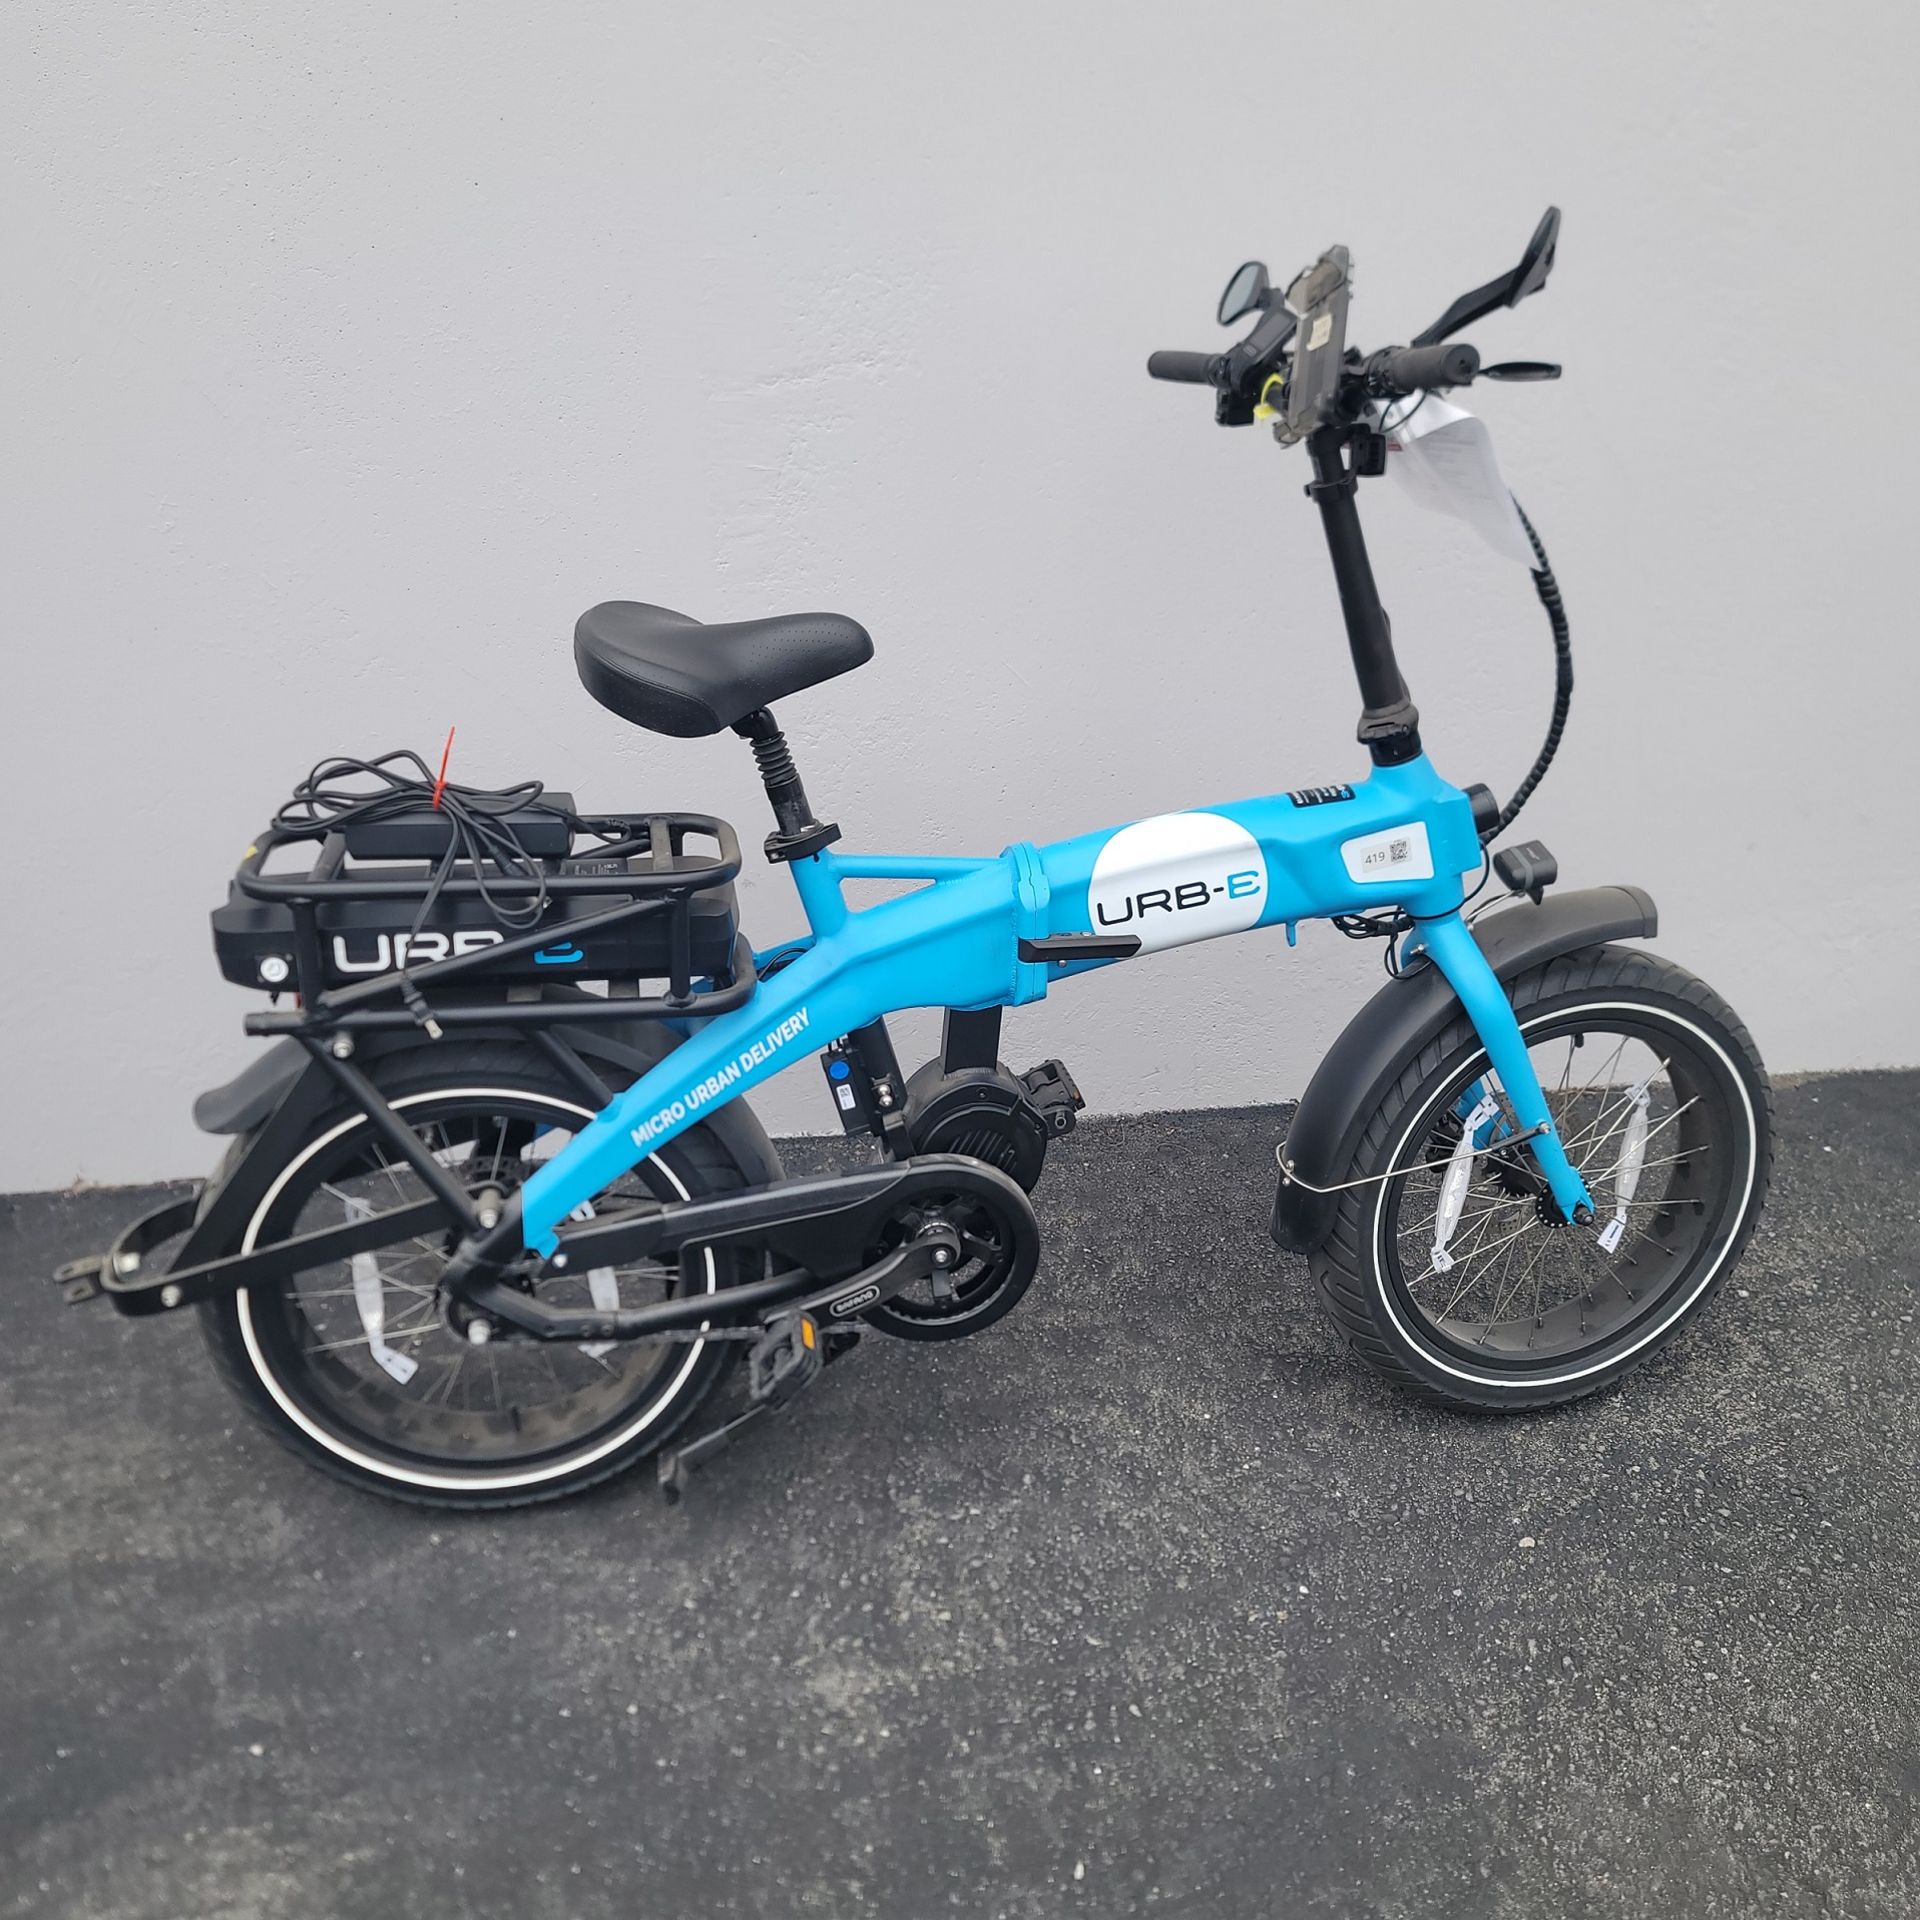 URB-E ELECTRIC DELIVERY BIKE, USED, 750W MID DRIVE MOTOR, SINGLE SPEED, THUMB THROTTLE WITH PEDAL - Image 2 of 3